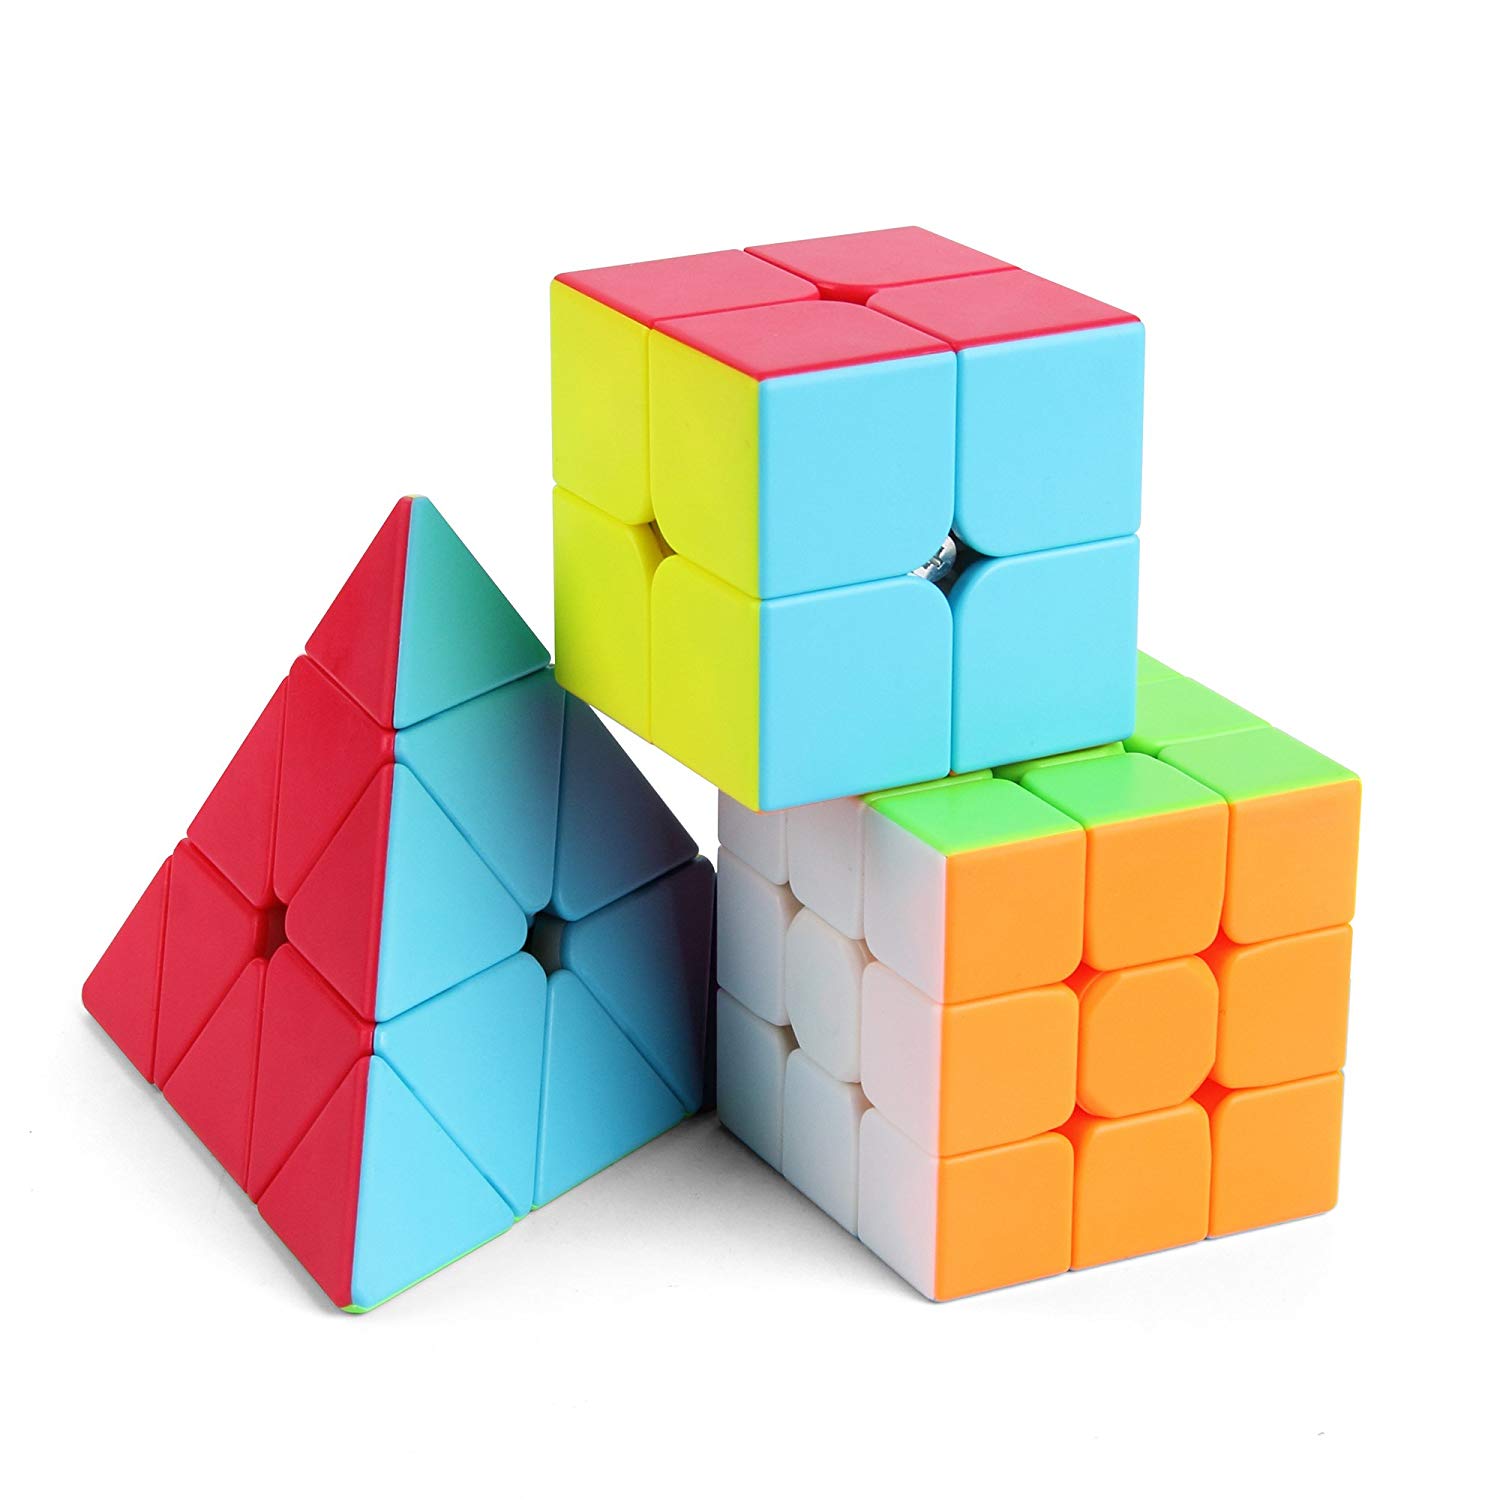 Educational Speed Cube Set 3 Pack Magic Cube - Includes Speed